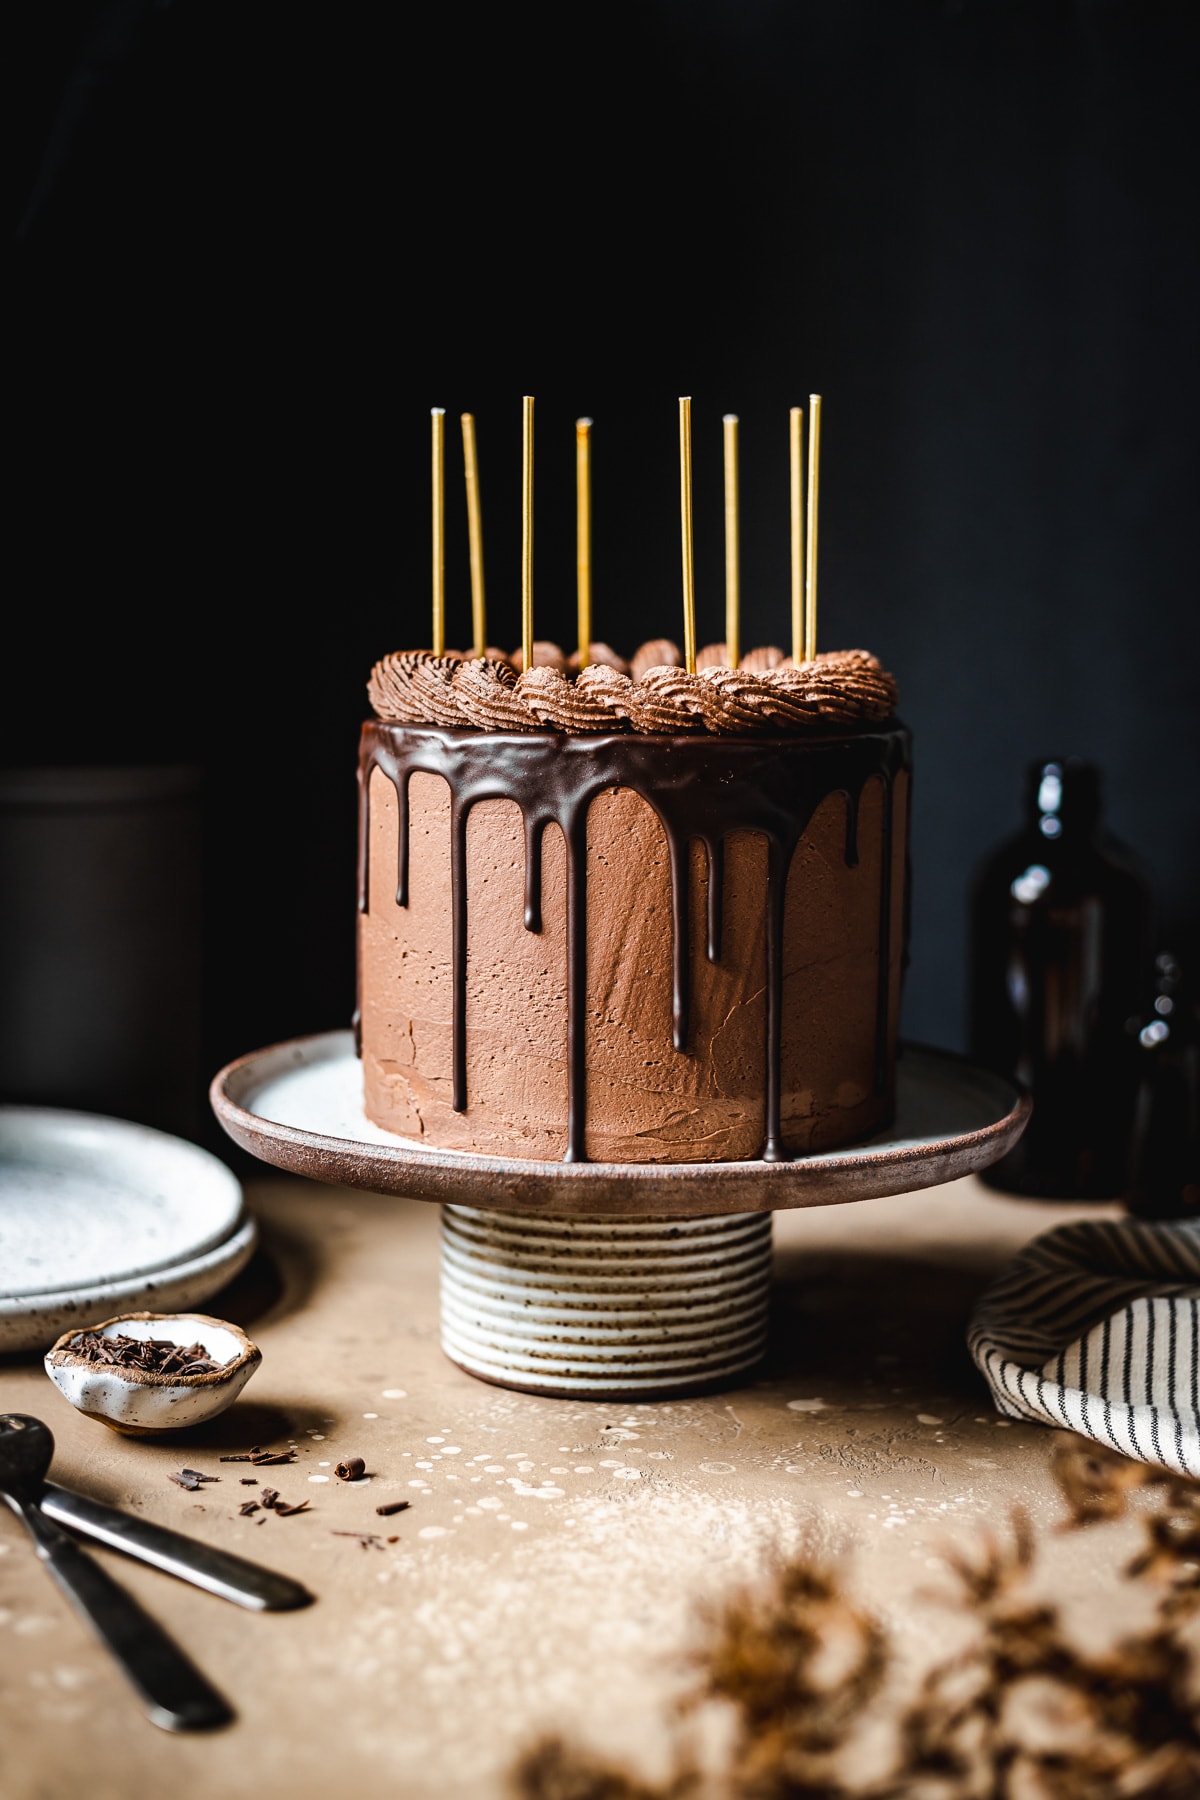 A moody image of a drip cake on a ceramic cake stand on a tan stone surface. There are yellow candles on the cake. Plates, a napkin, and forks rest nearby. The background is black.